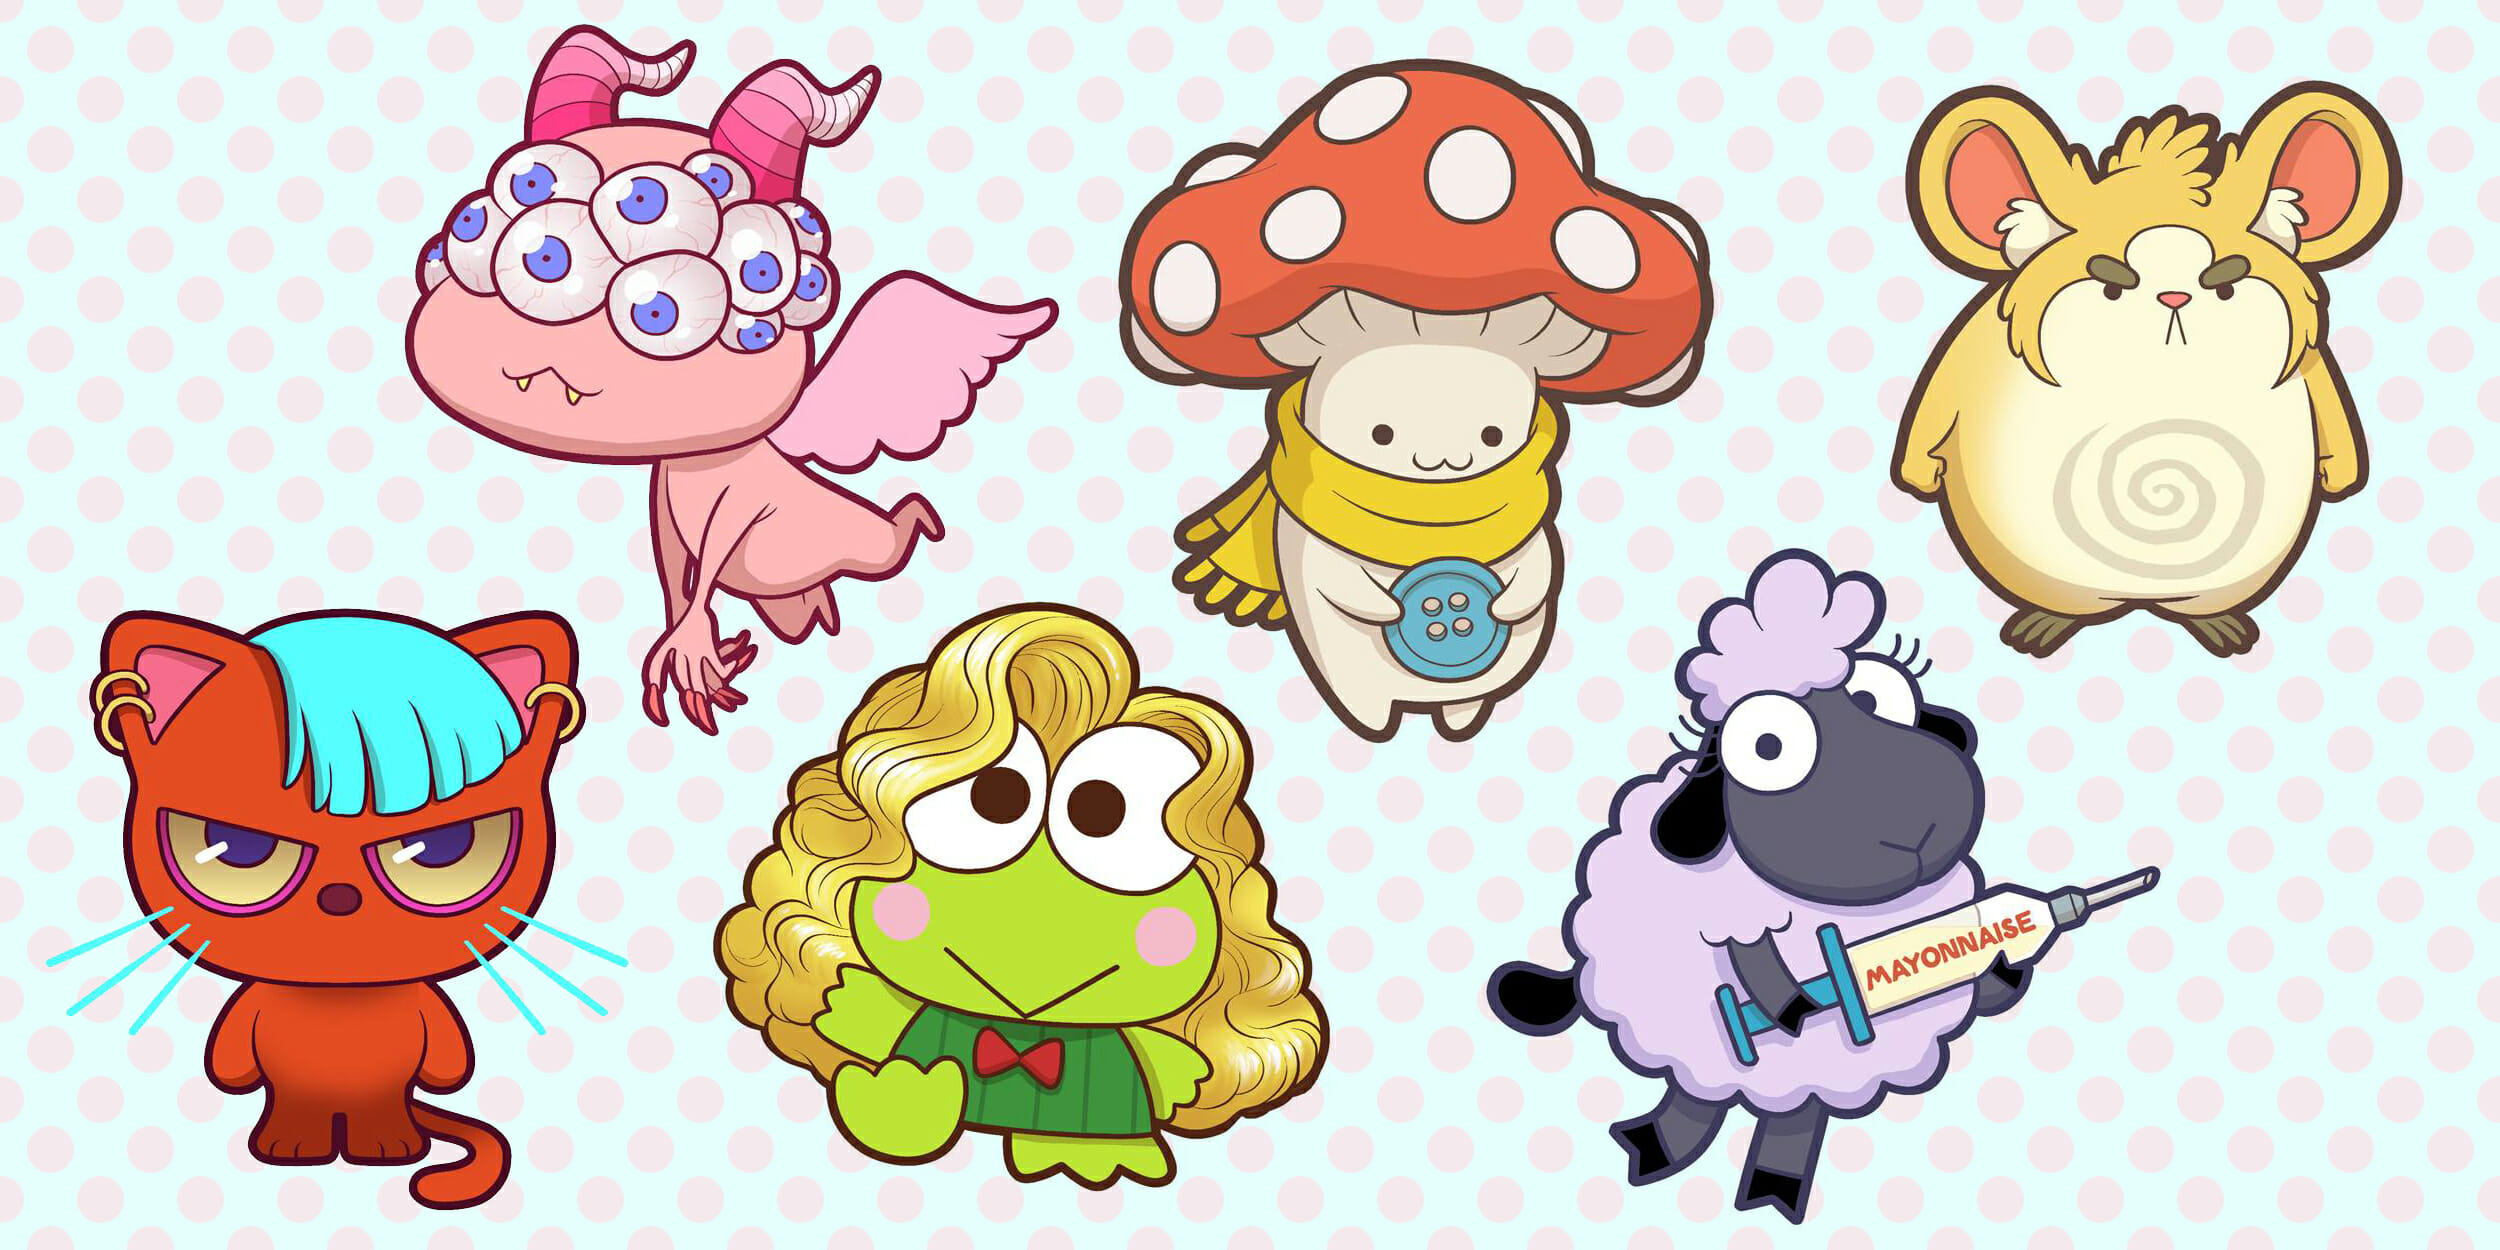 About Sanrio Characters